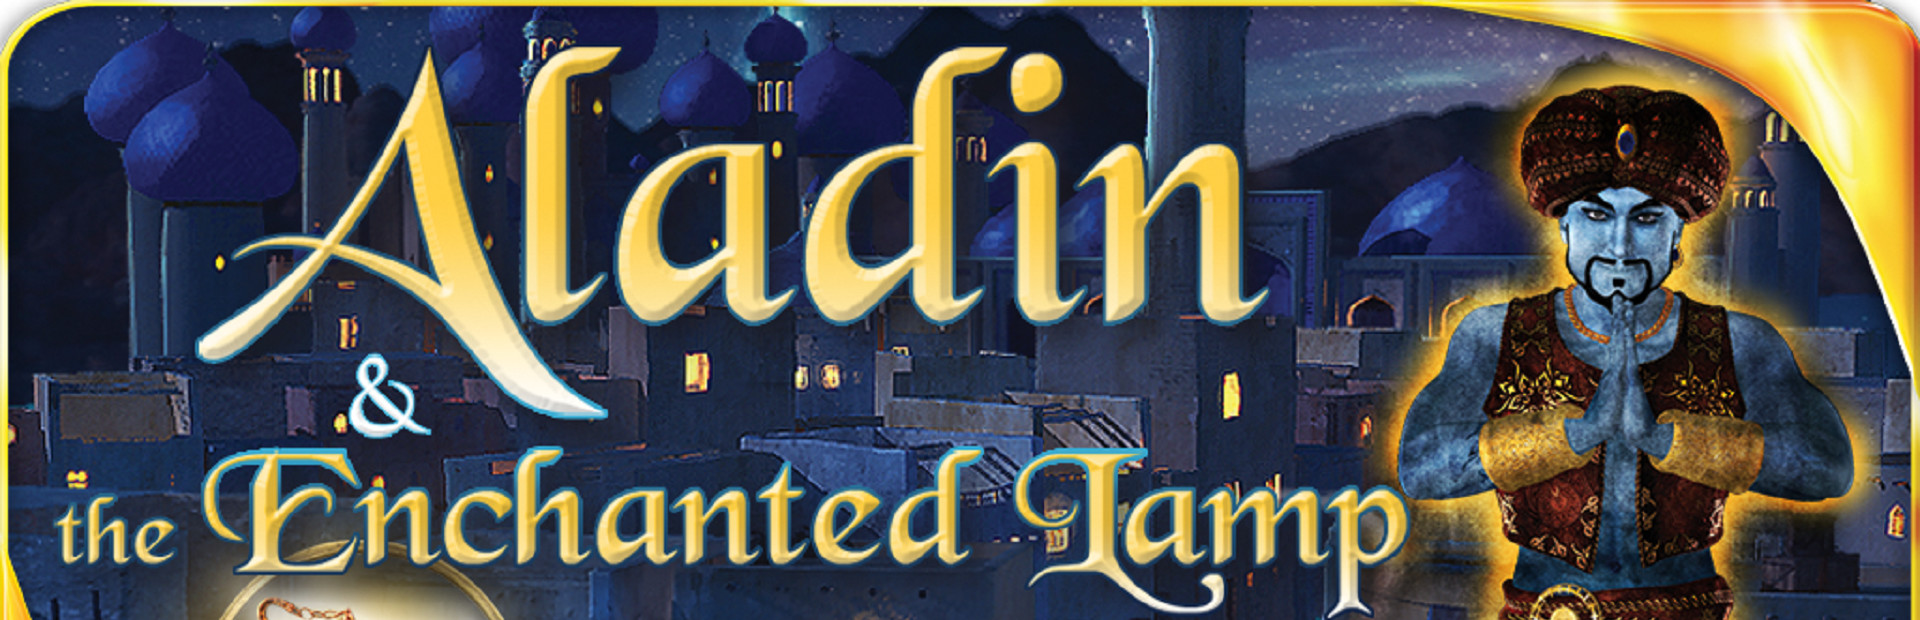 Aladin & the Enchanted Lamp cover image